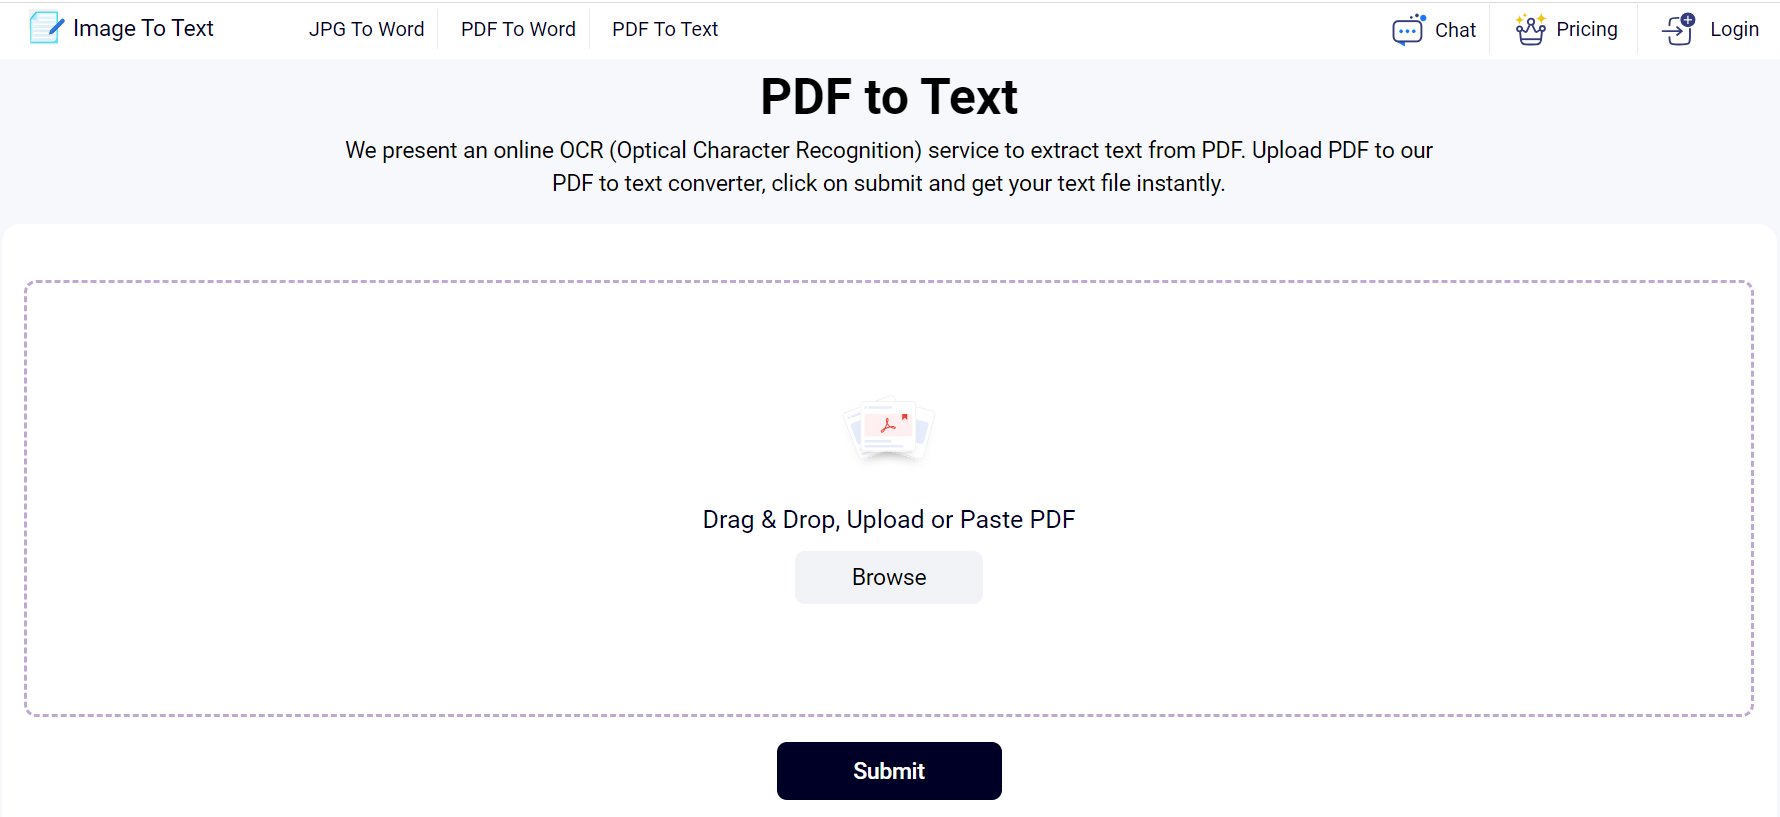 pdf to text by Imagetotext.info